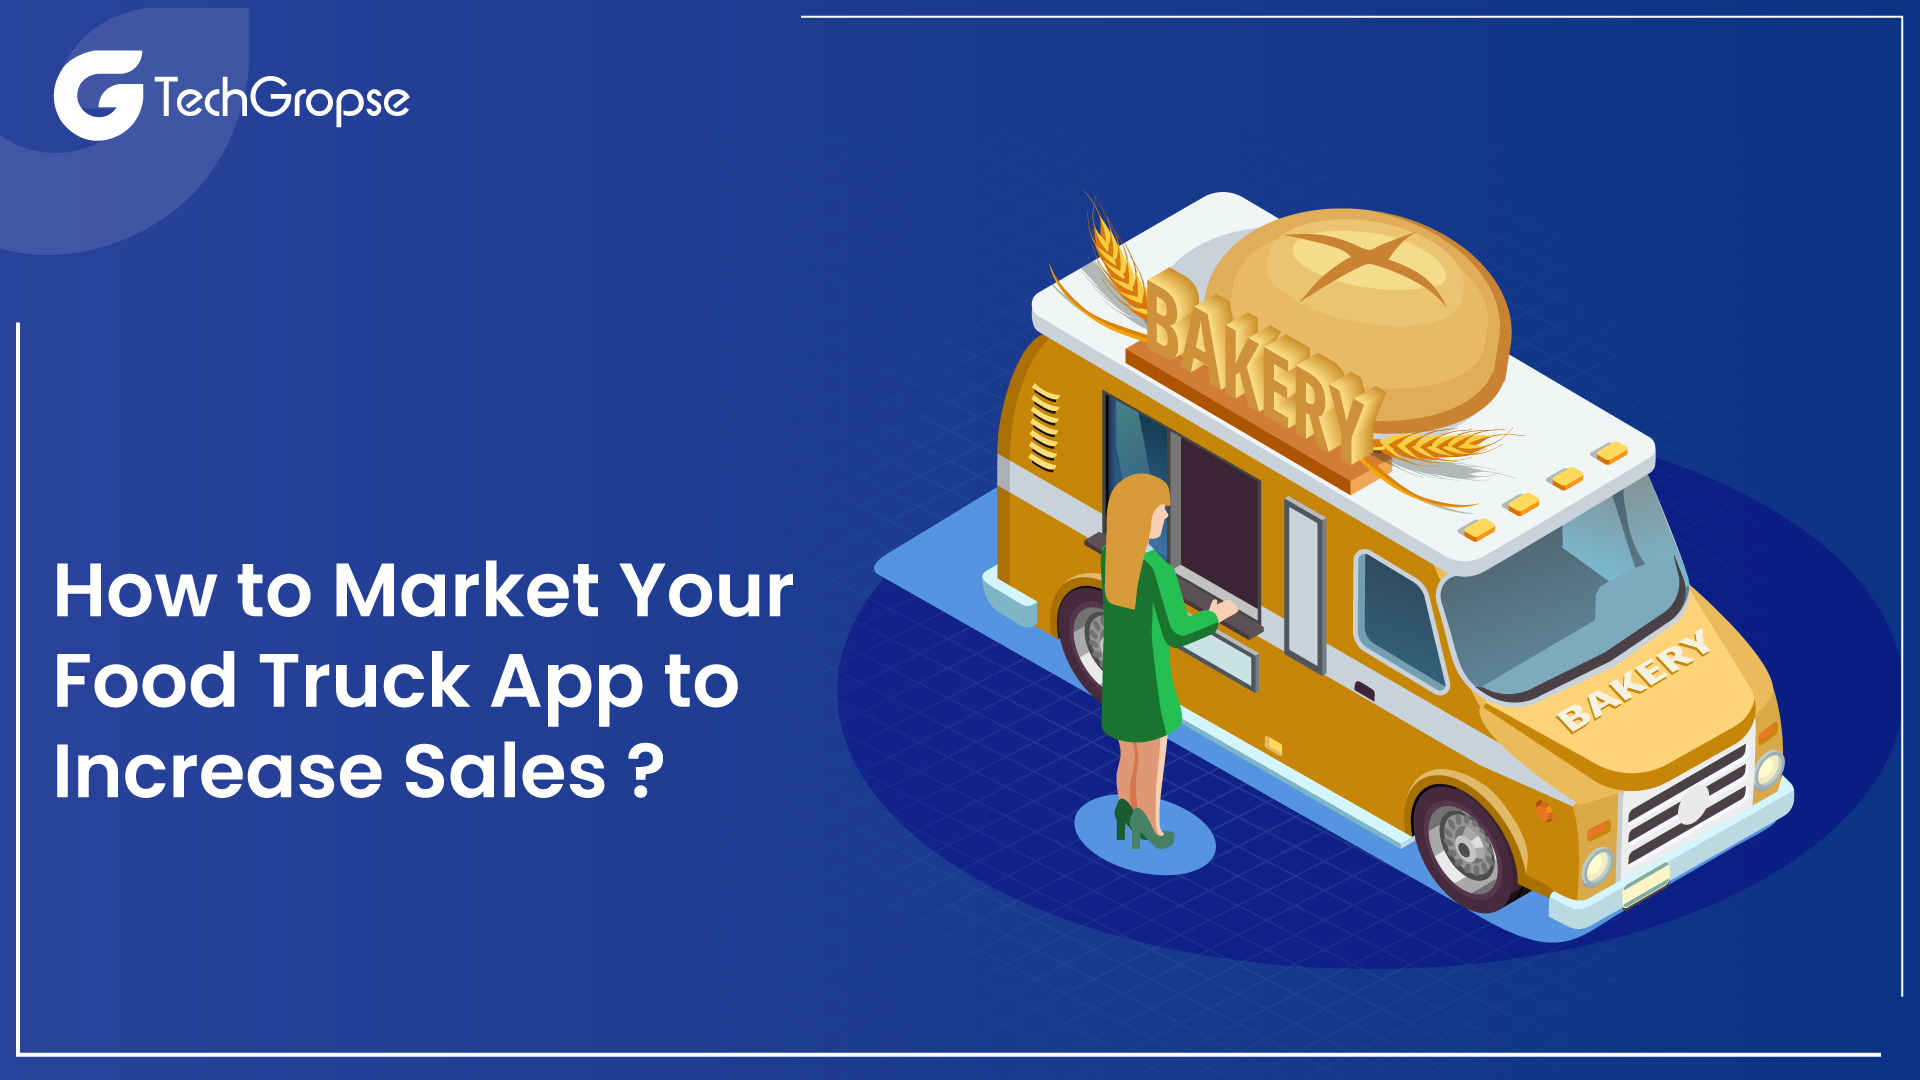 How to Market Your Food Truck App to Increase Sales